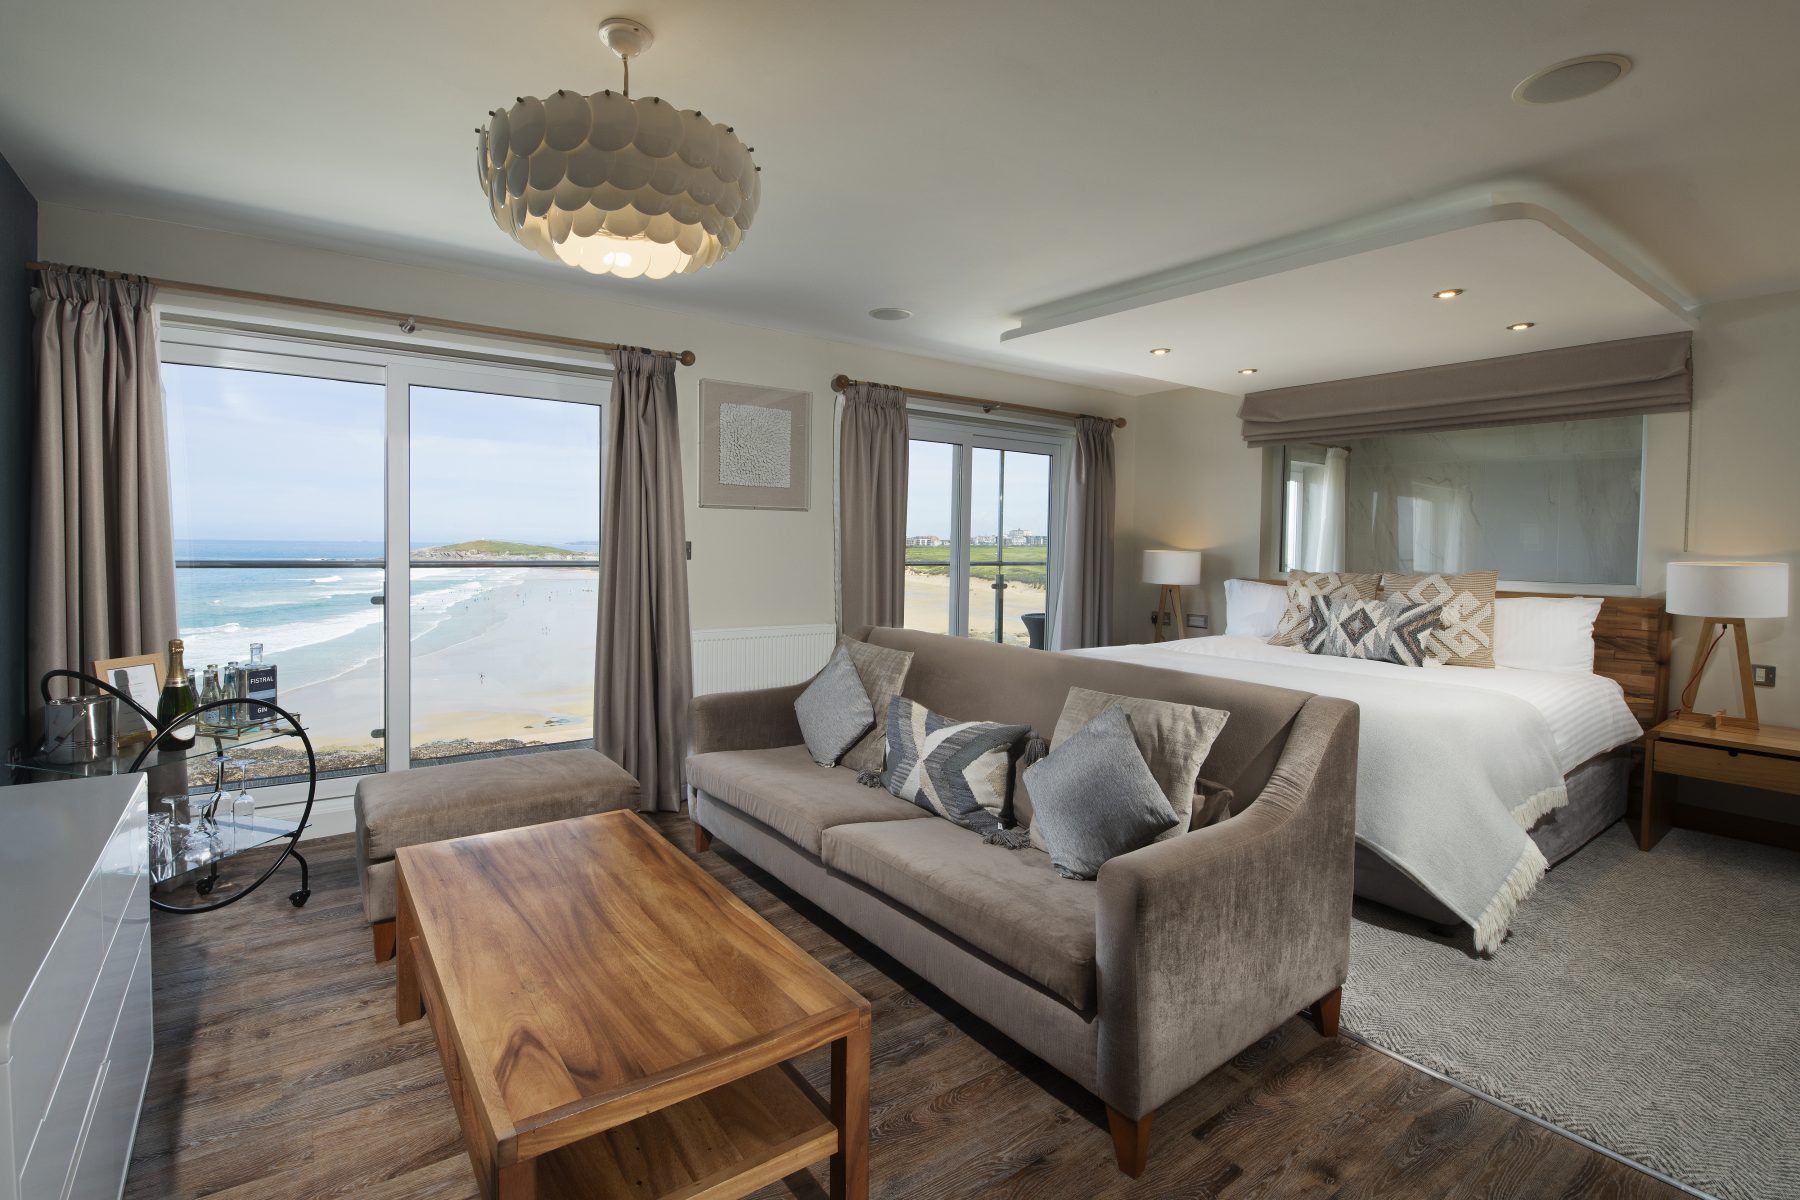 Fistral Beach suite